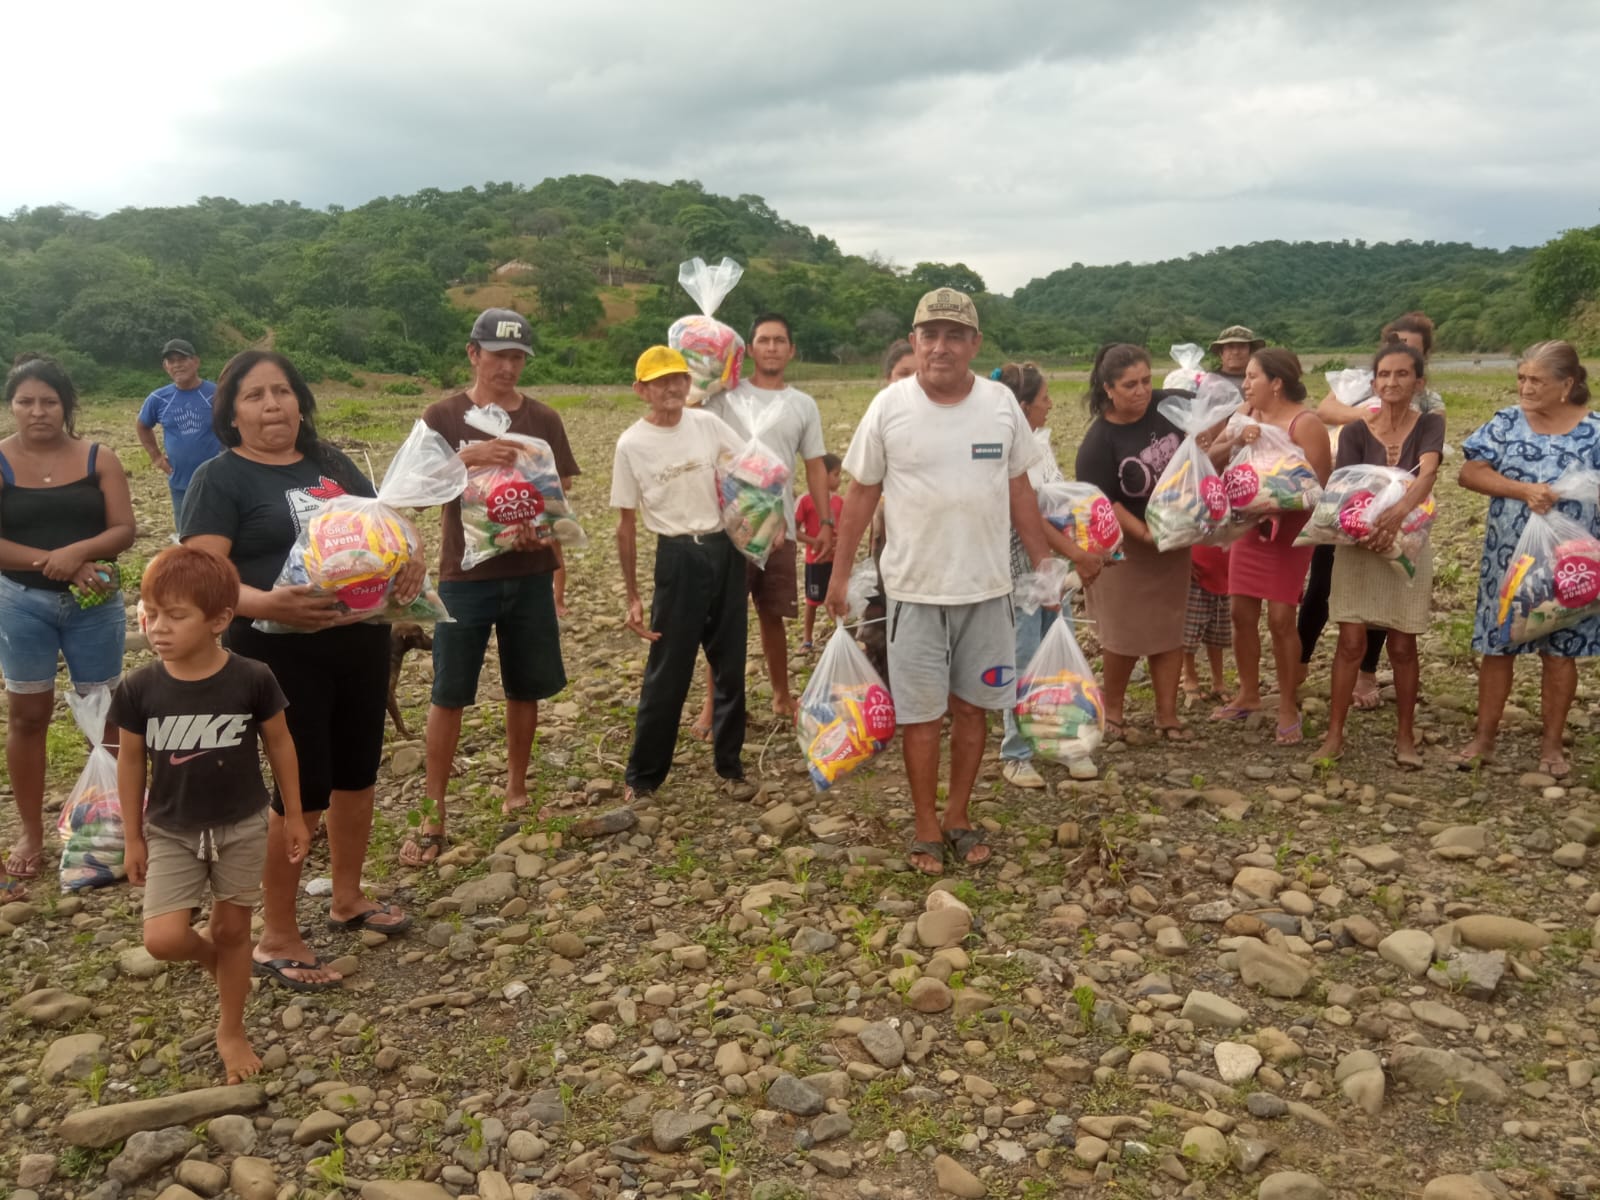 A group of people stand together holding bags with supplies distributed as part of Hombro a Hombro's humanitarian aid support in response to rainfall and dengue in rural Peru